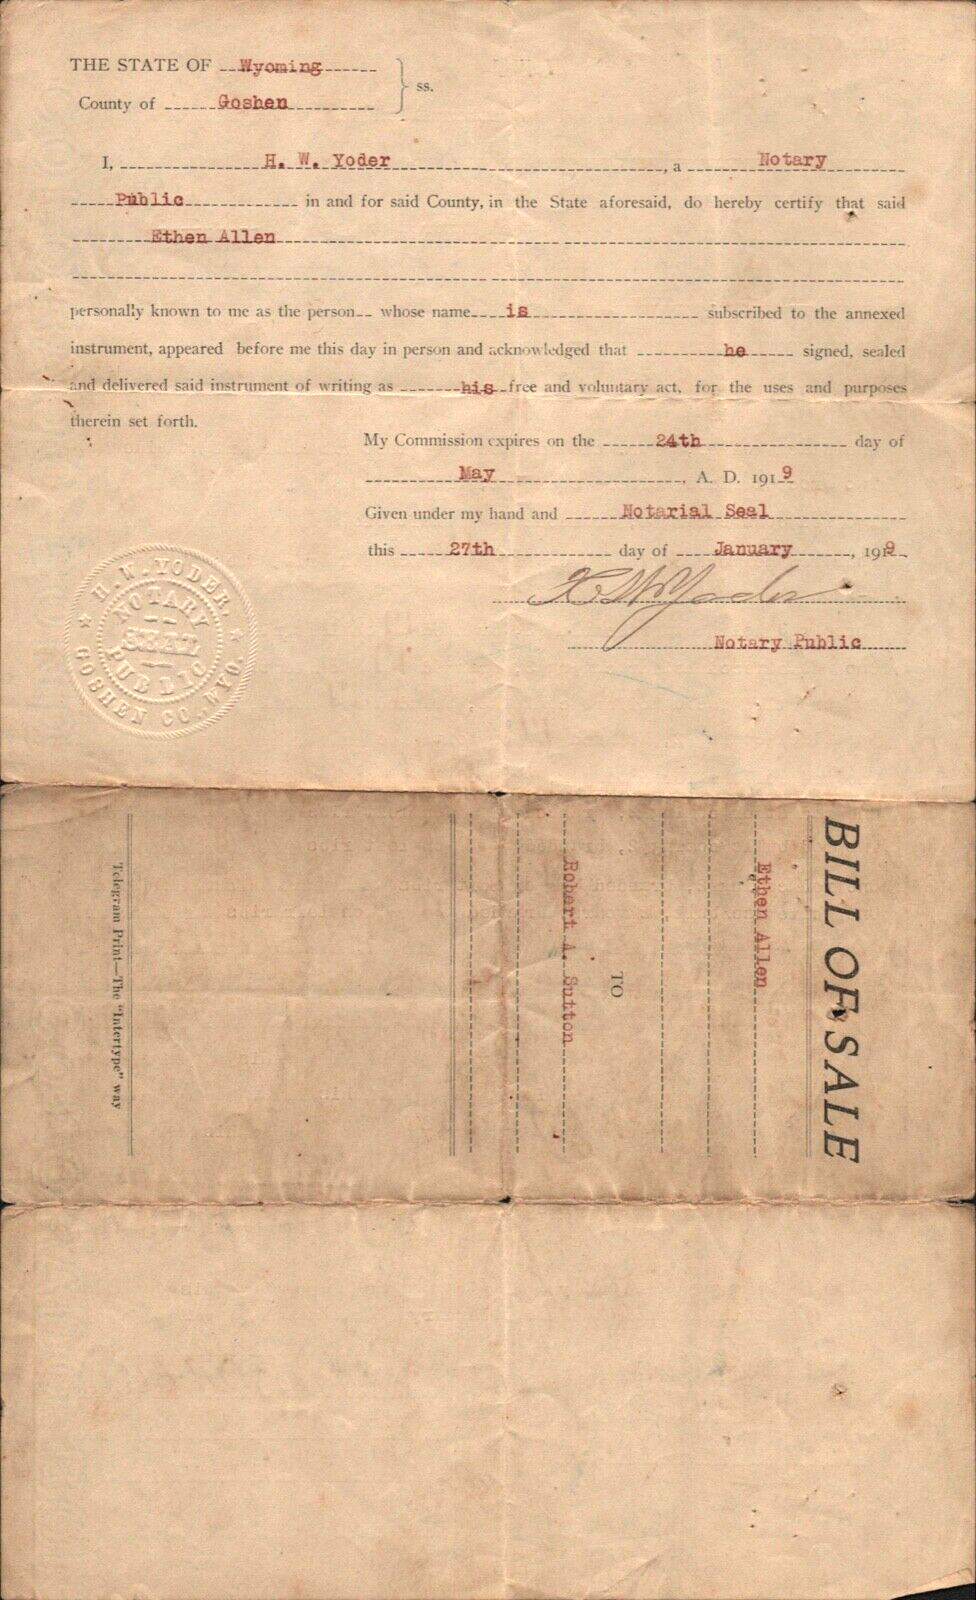 1919 WYOMING - GOSHEN COUNTY antique legal document HEIFERS, CATTLE BILL OF SALE